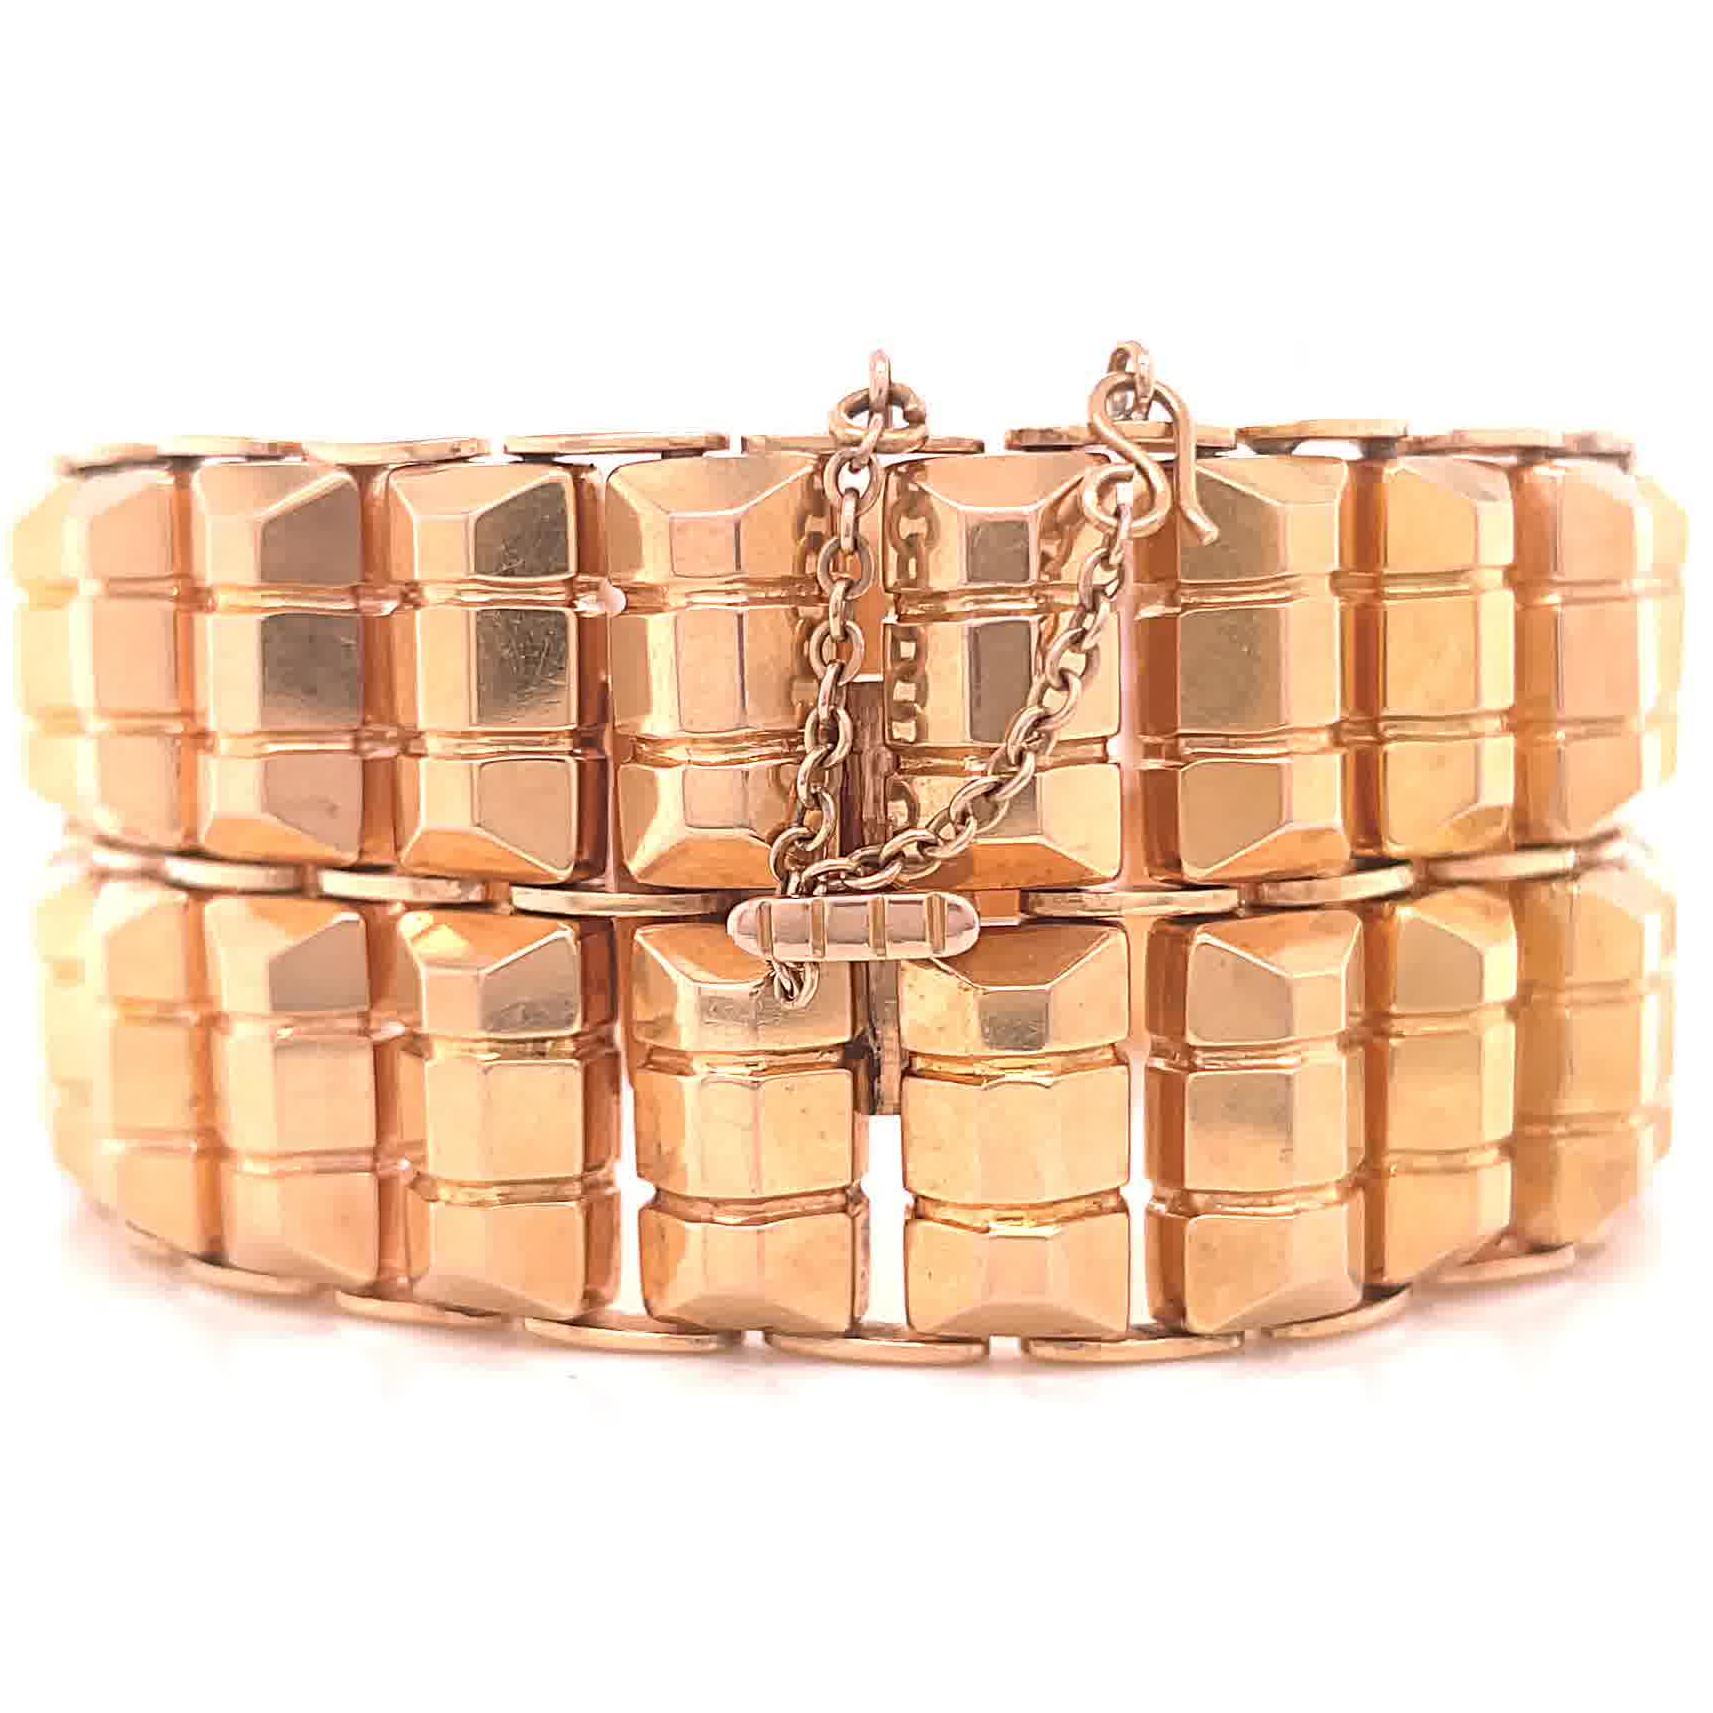 Retro 18 Karat Rose Gold Tank Bracelet. Circa 1940's. 7 1/4 inches. 

About The Piece: Do you like a bold gold look? You're in luck because substantial gold pieces are the hottest trend of the new decade. This bracelet is solid, confident and